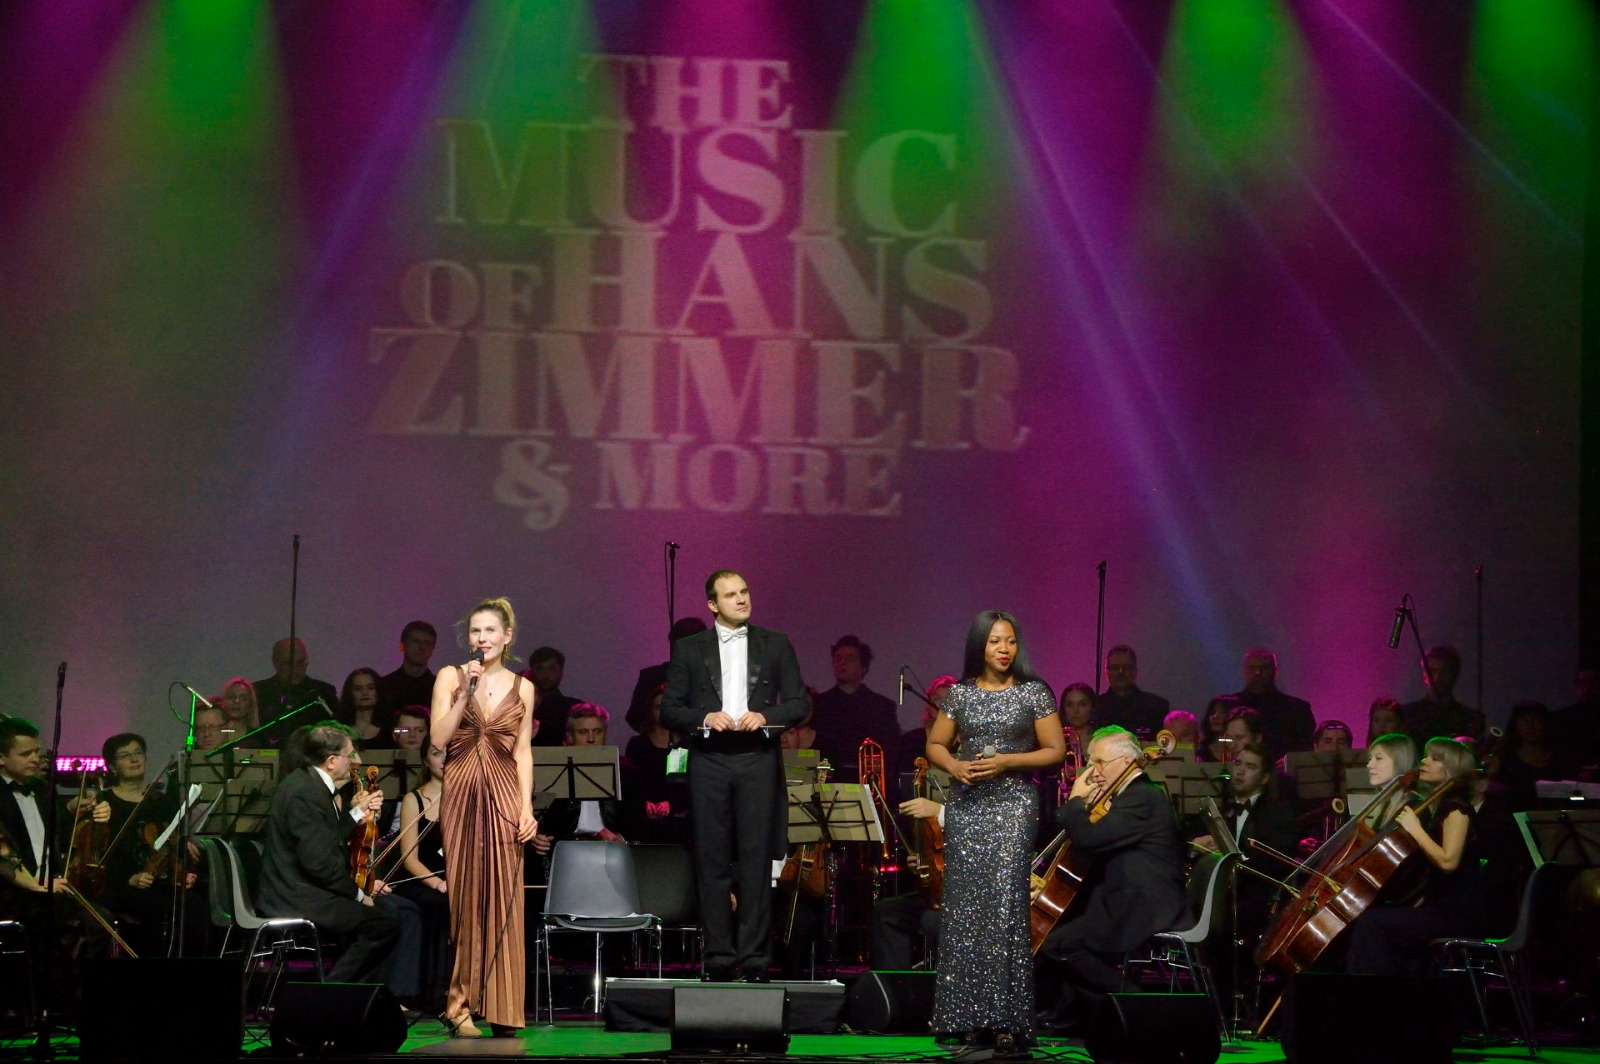 Hans Zimmer and others